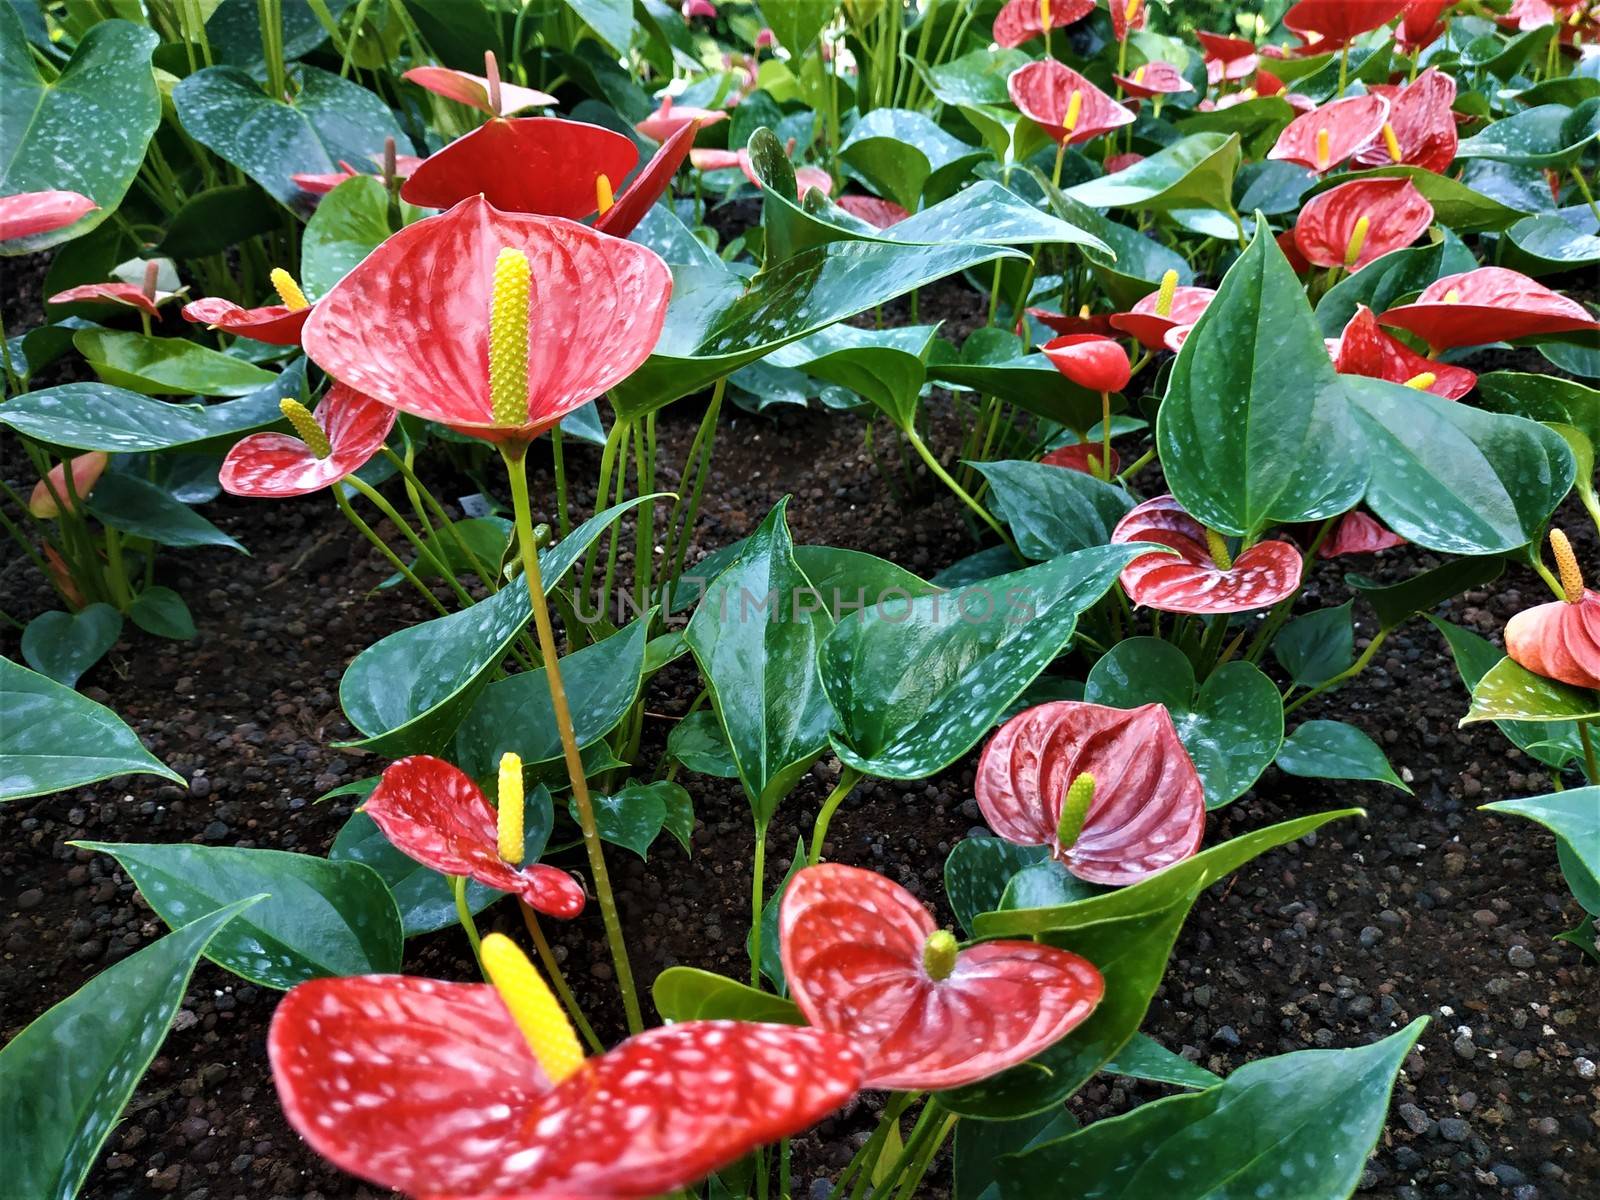 Beautiful red Anthurium flamingo flowers with yellow spadix by pisces2386